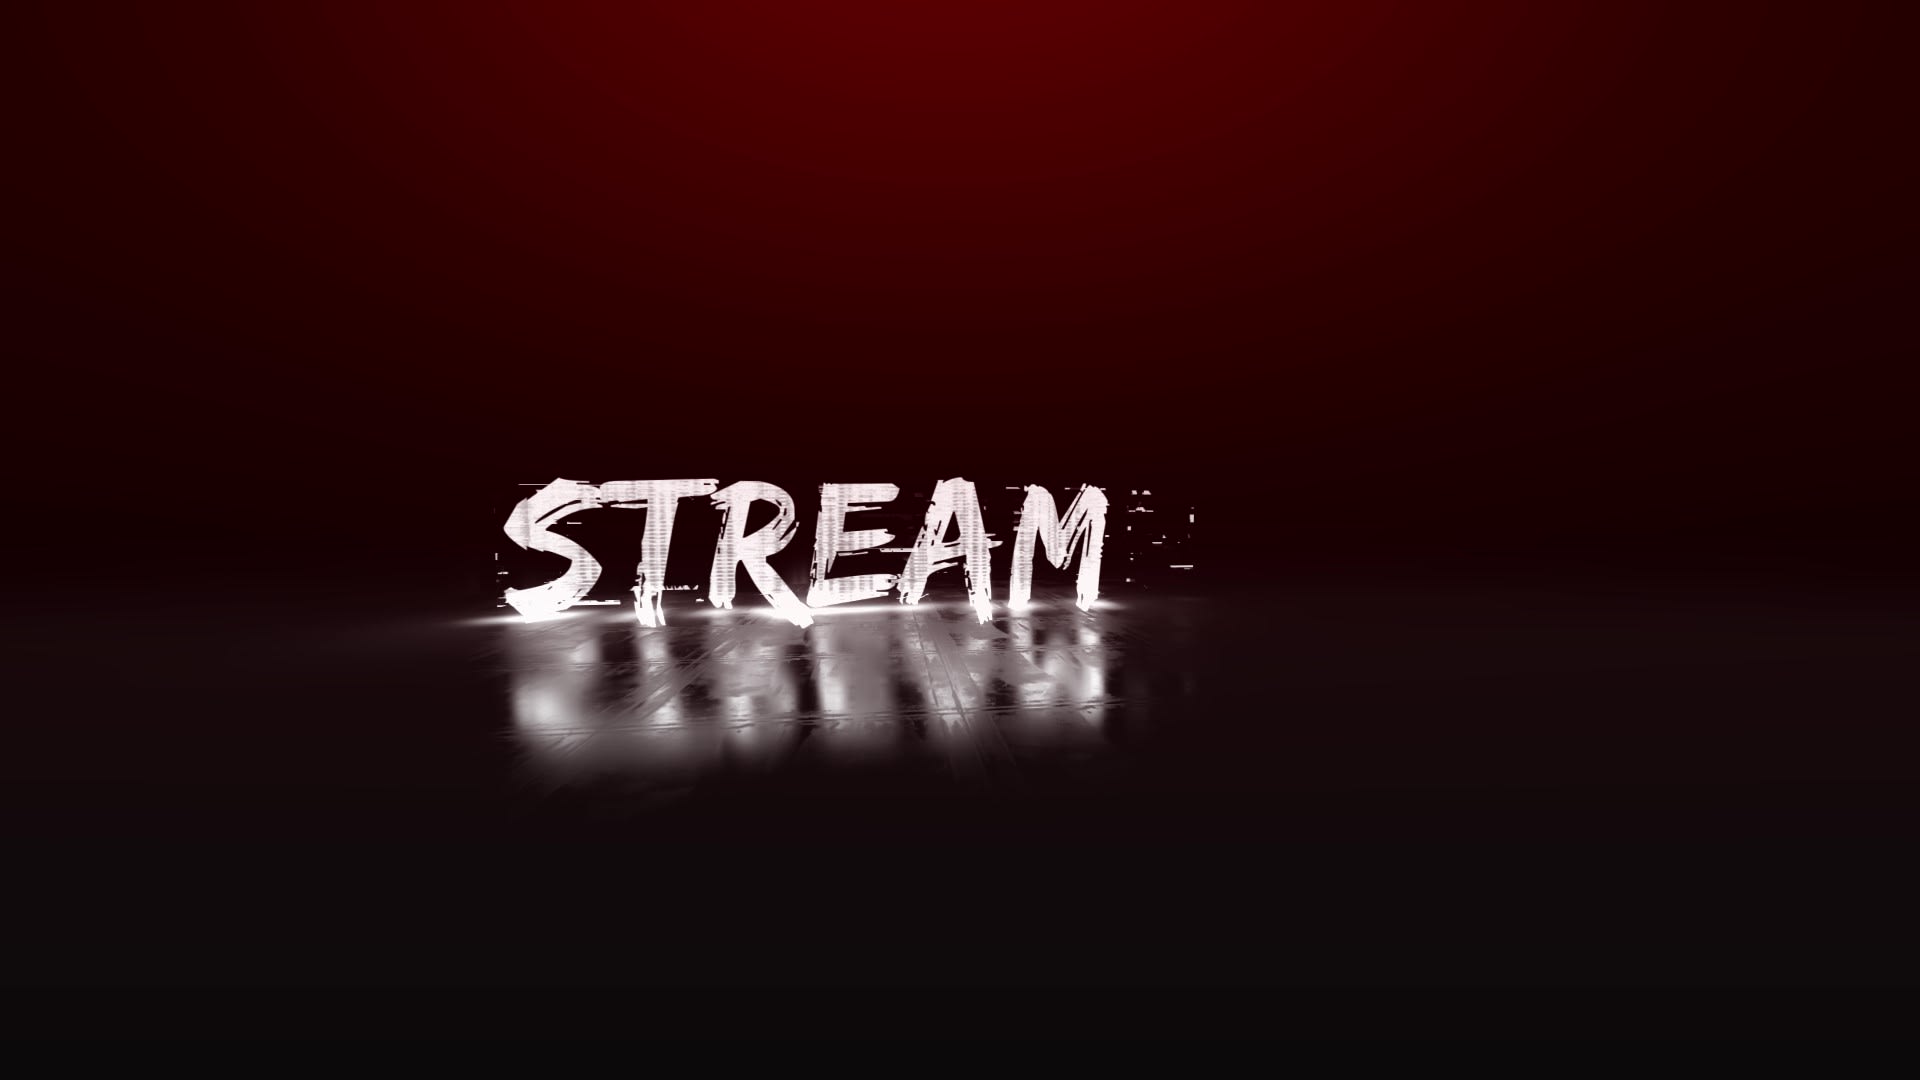 Make a custom stream starting and ending graphic